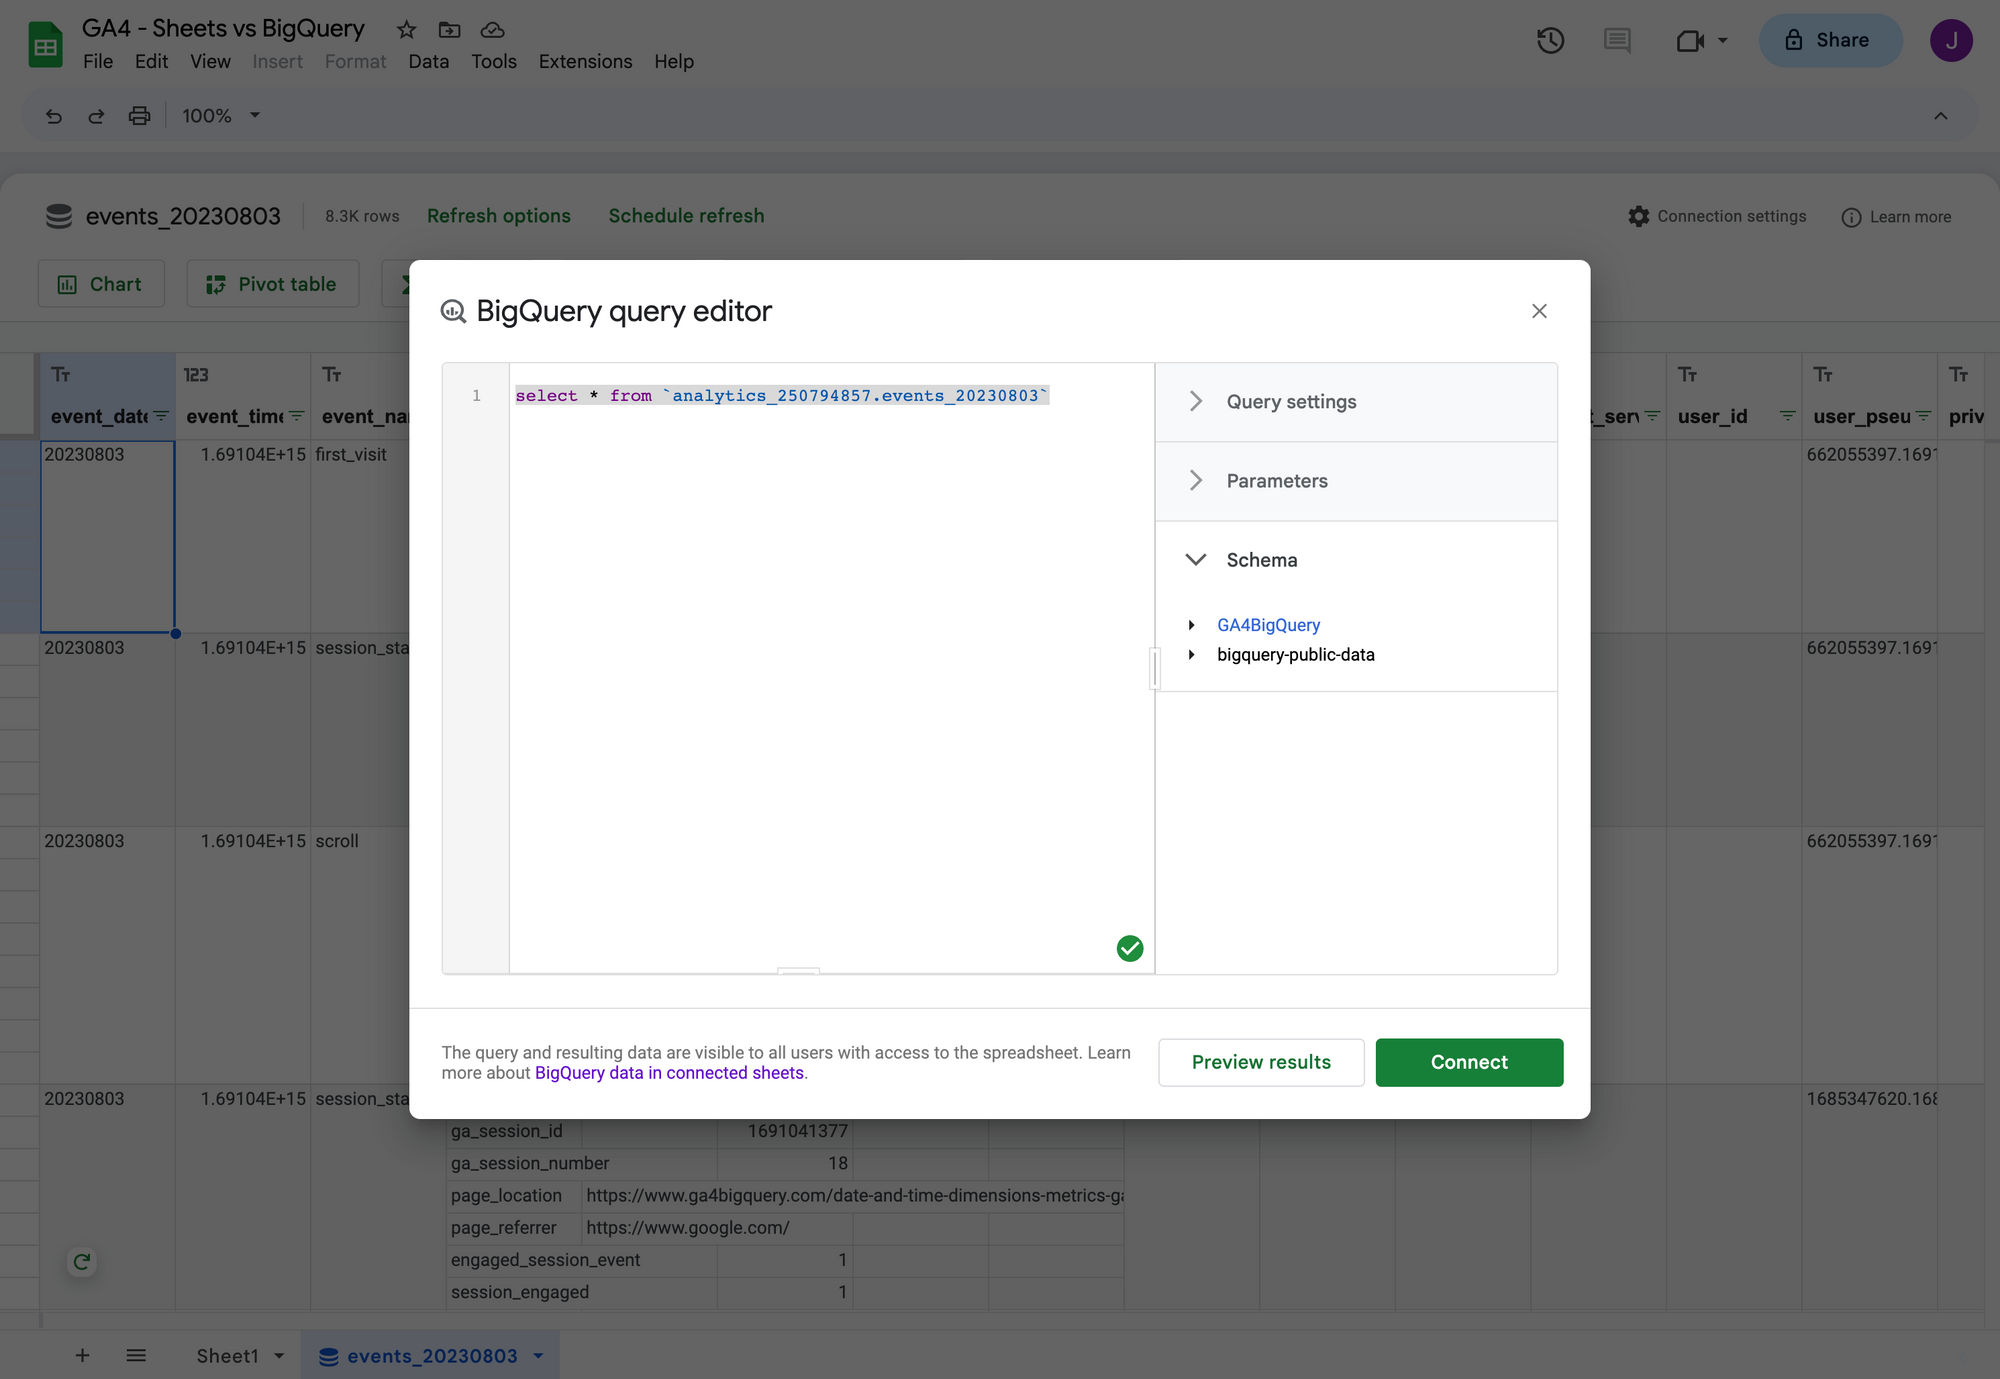 How to set up Google 'Connected' Sheets to access GA4 BigQuery export data without learning SQL